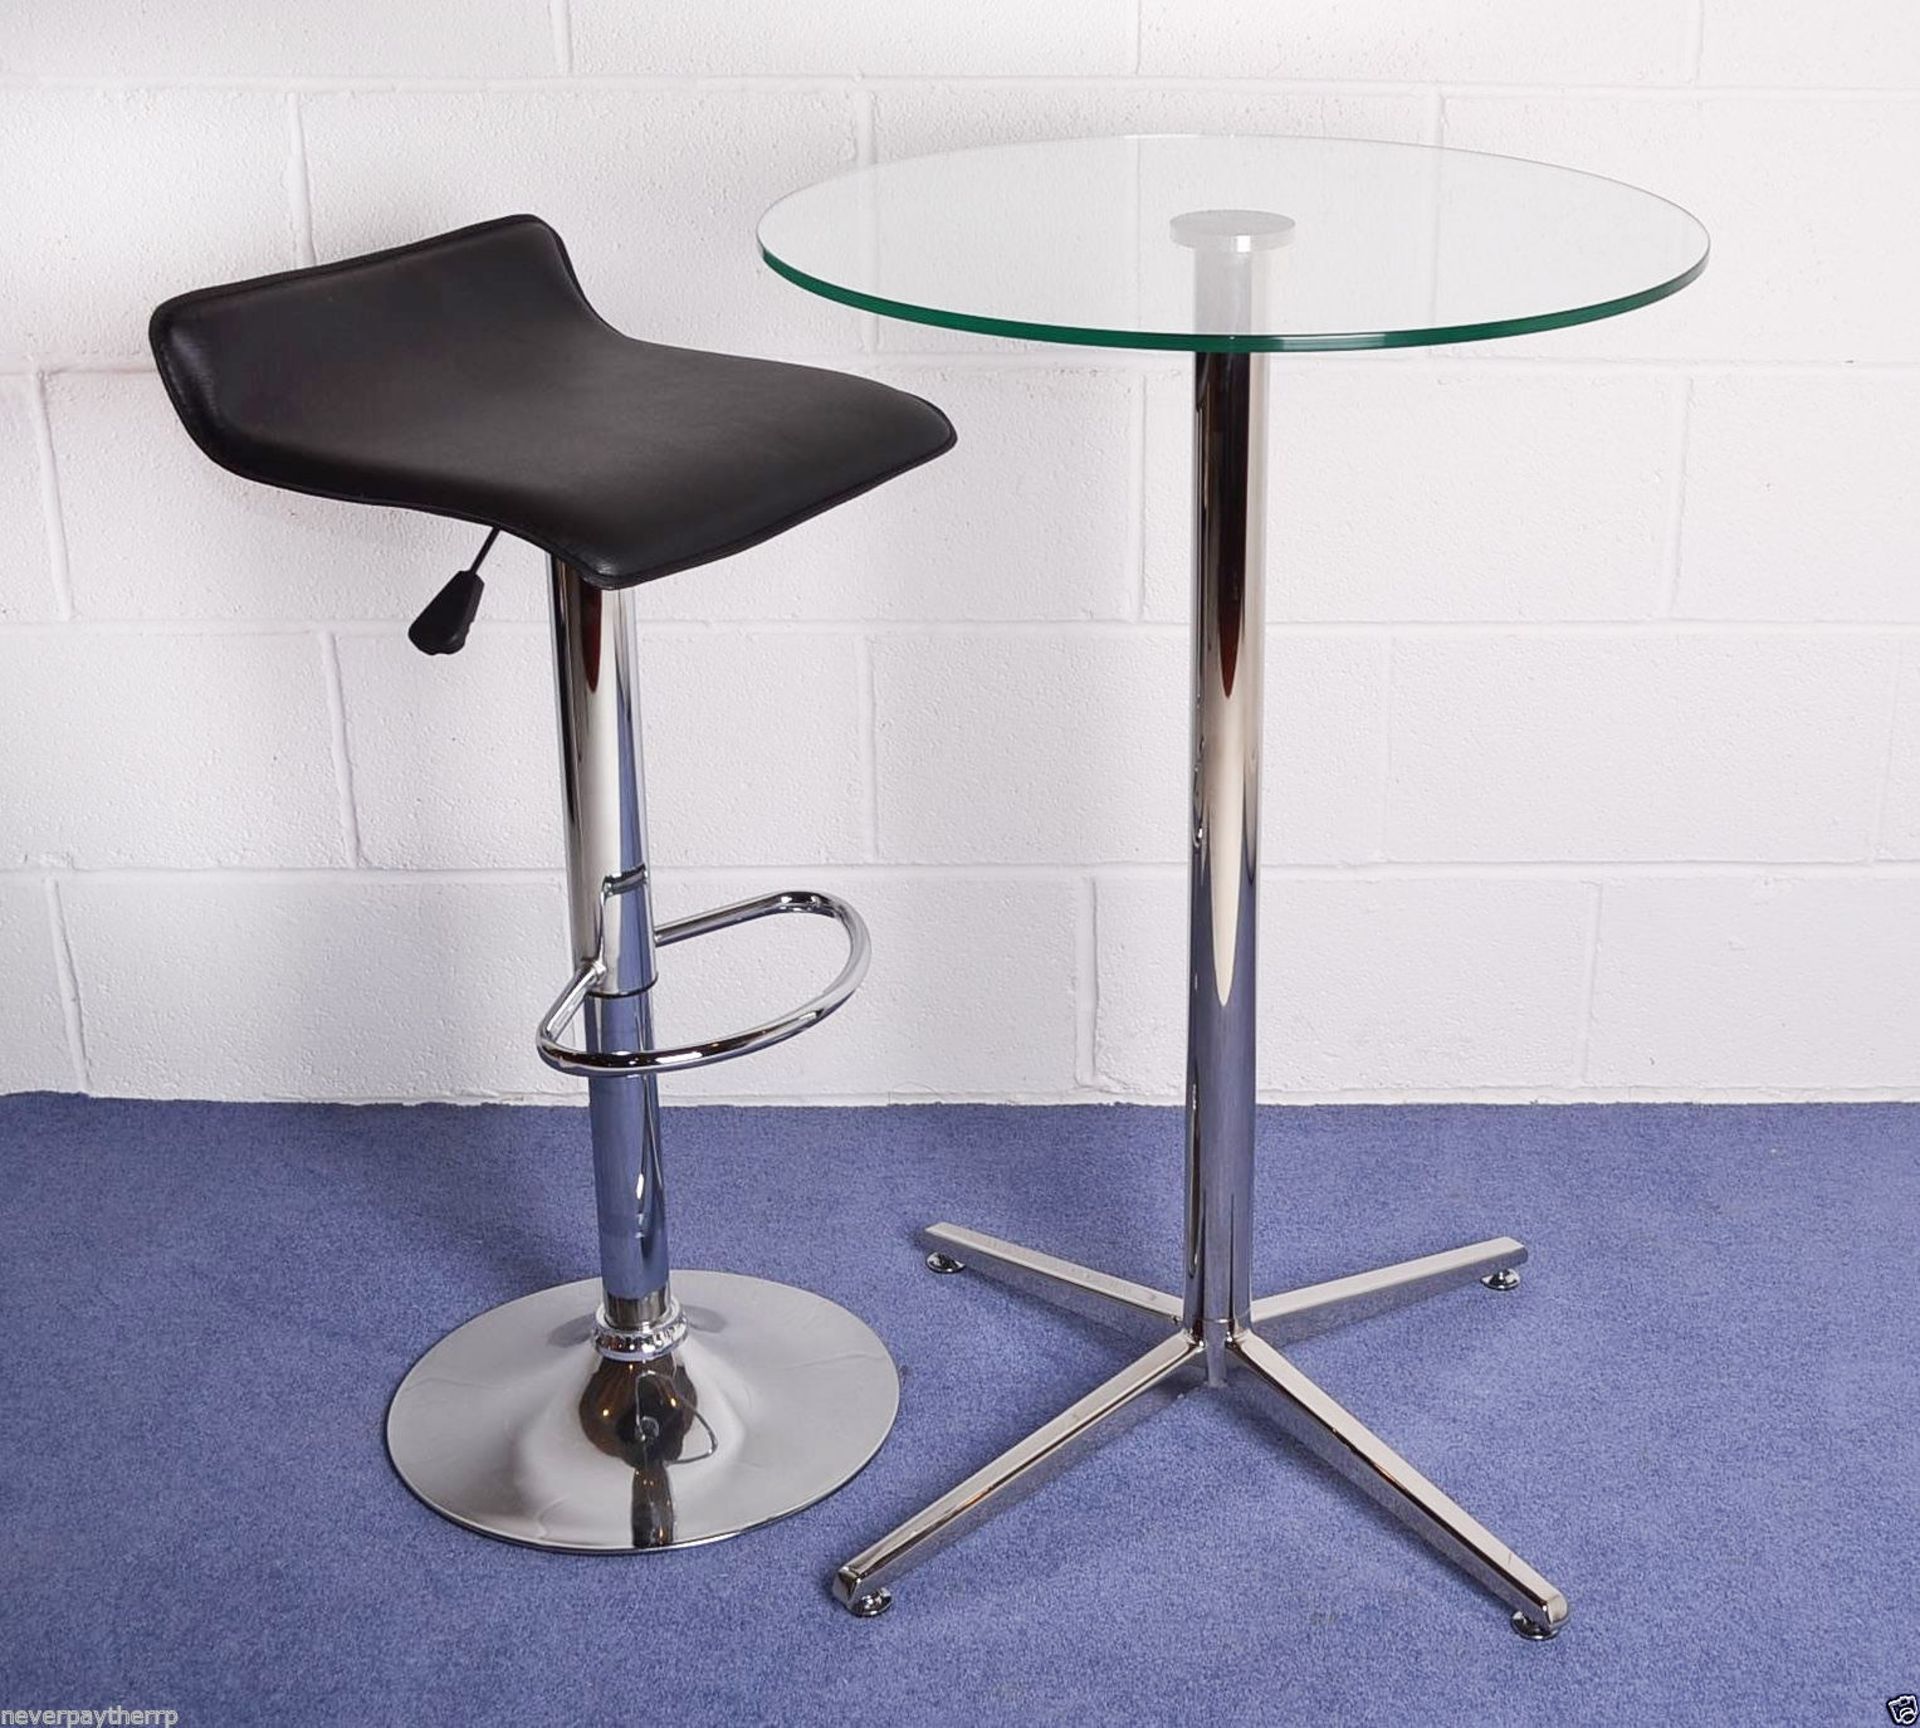 NEW JOHN LEWIS Brigitte Glass Bar Table & 2 Gas Lift Stools - RRP £400  A stylish round 10mm thick